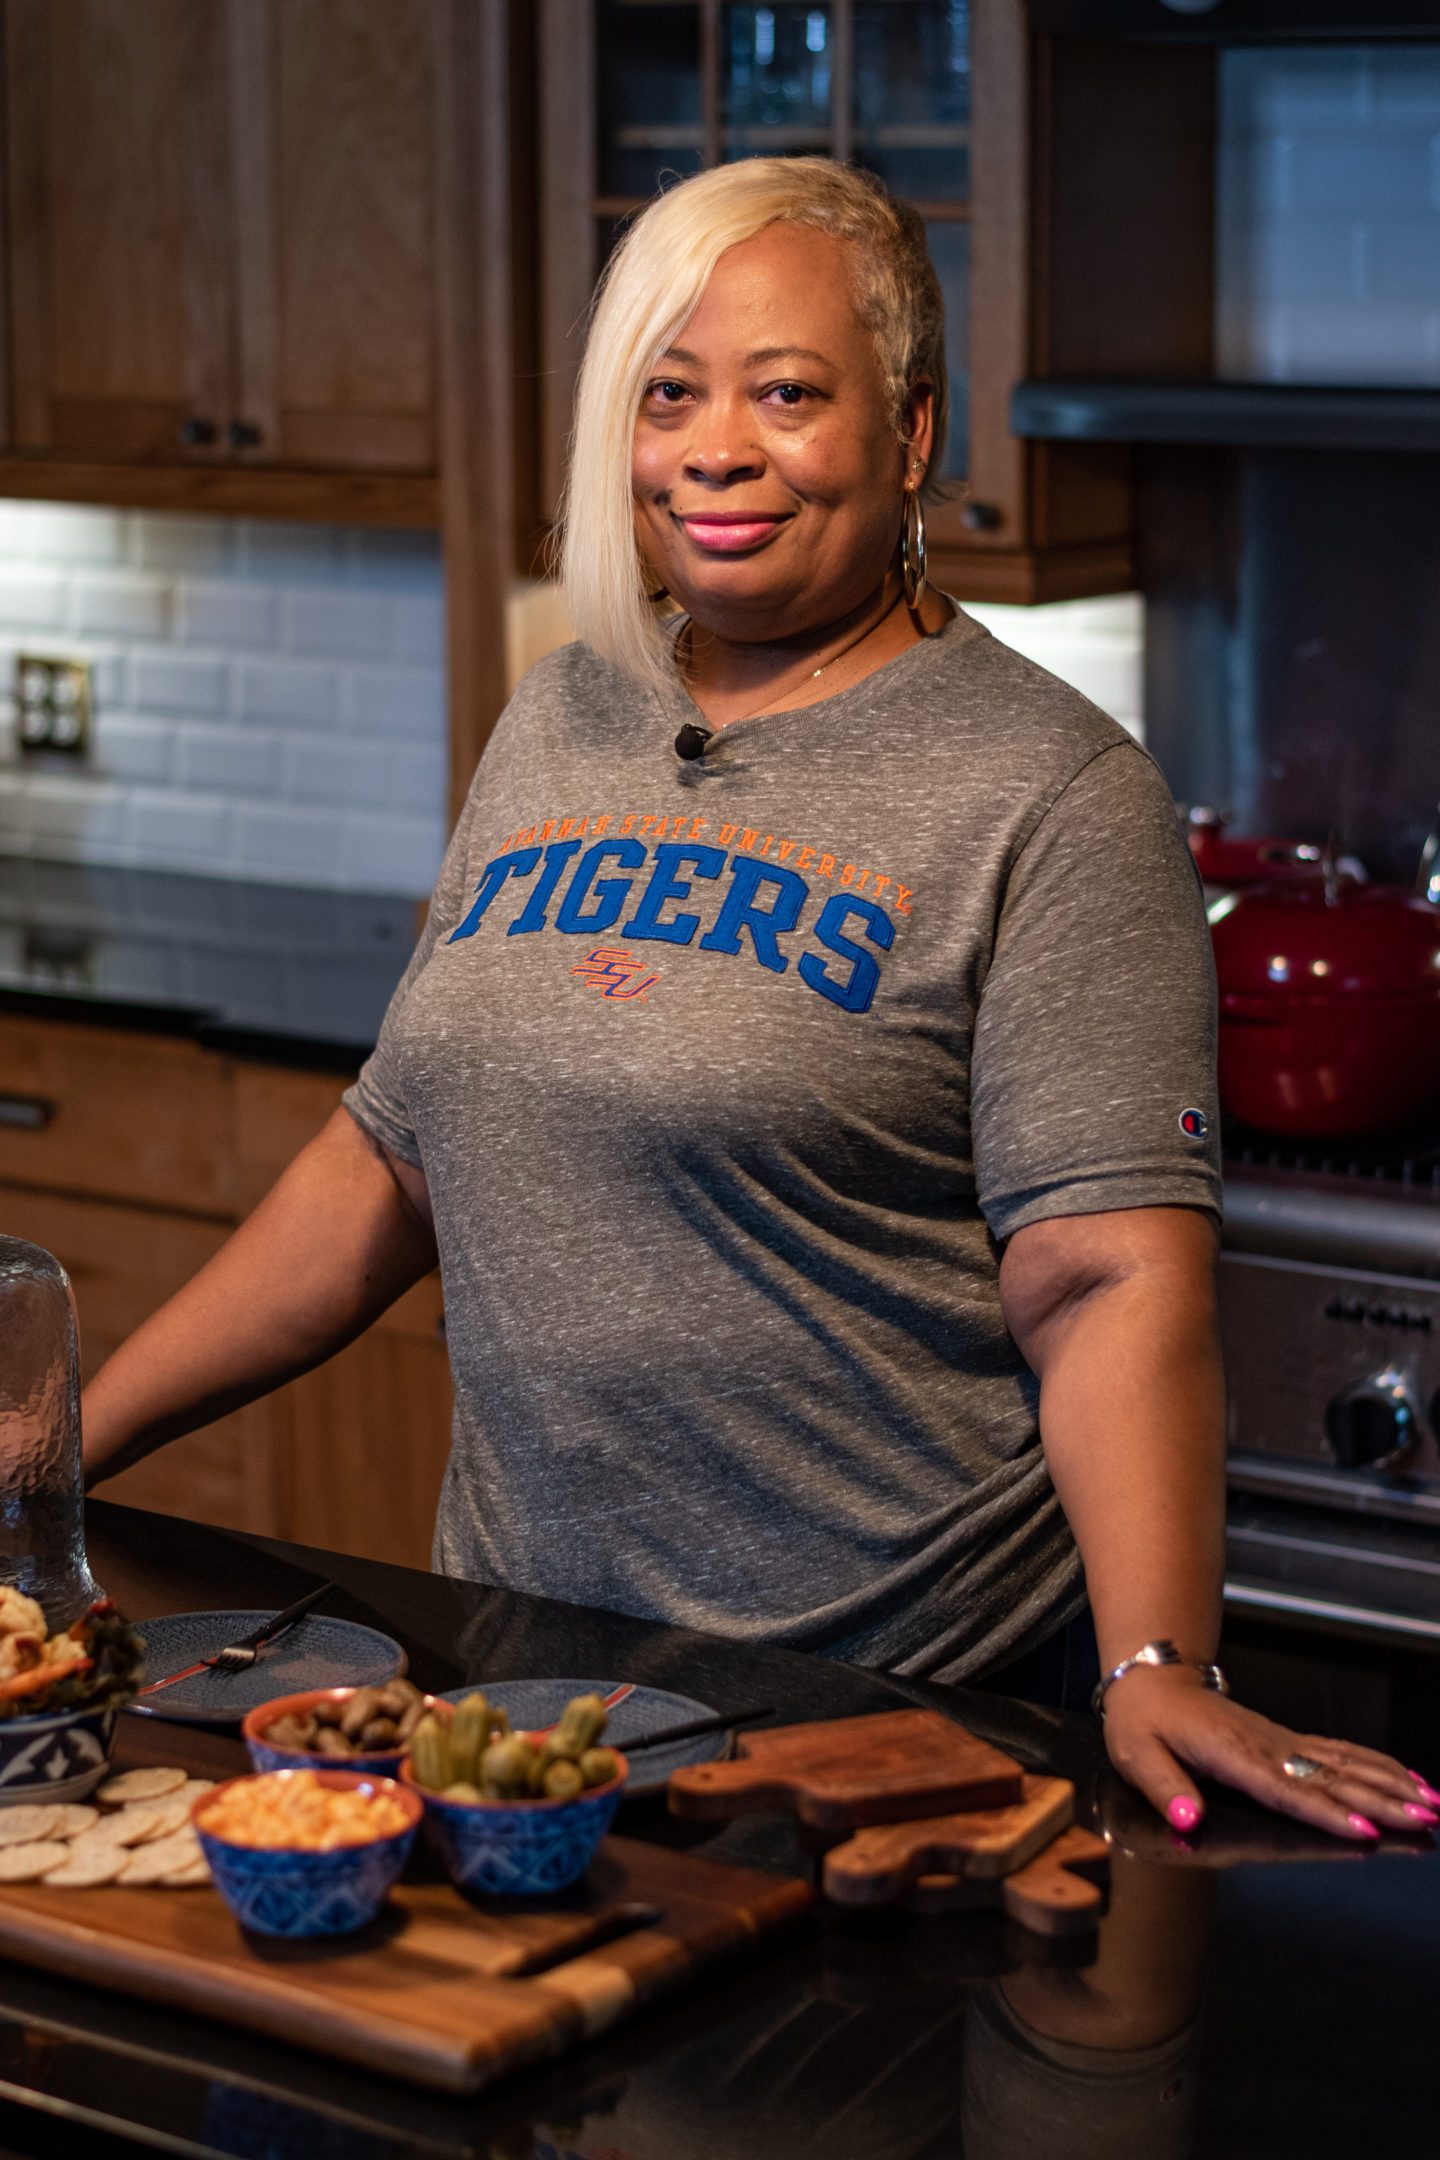 Gina Capers Willis’ HBCU inspired Upscale Nibbles and Libations